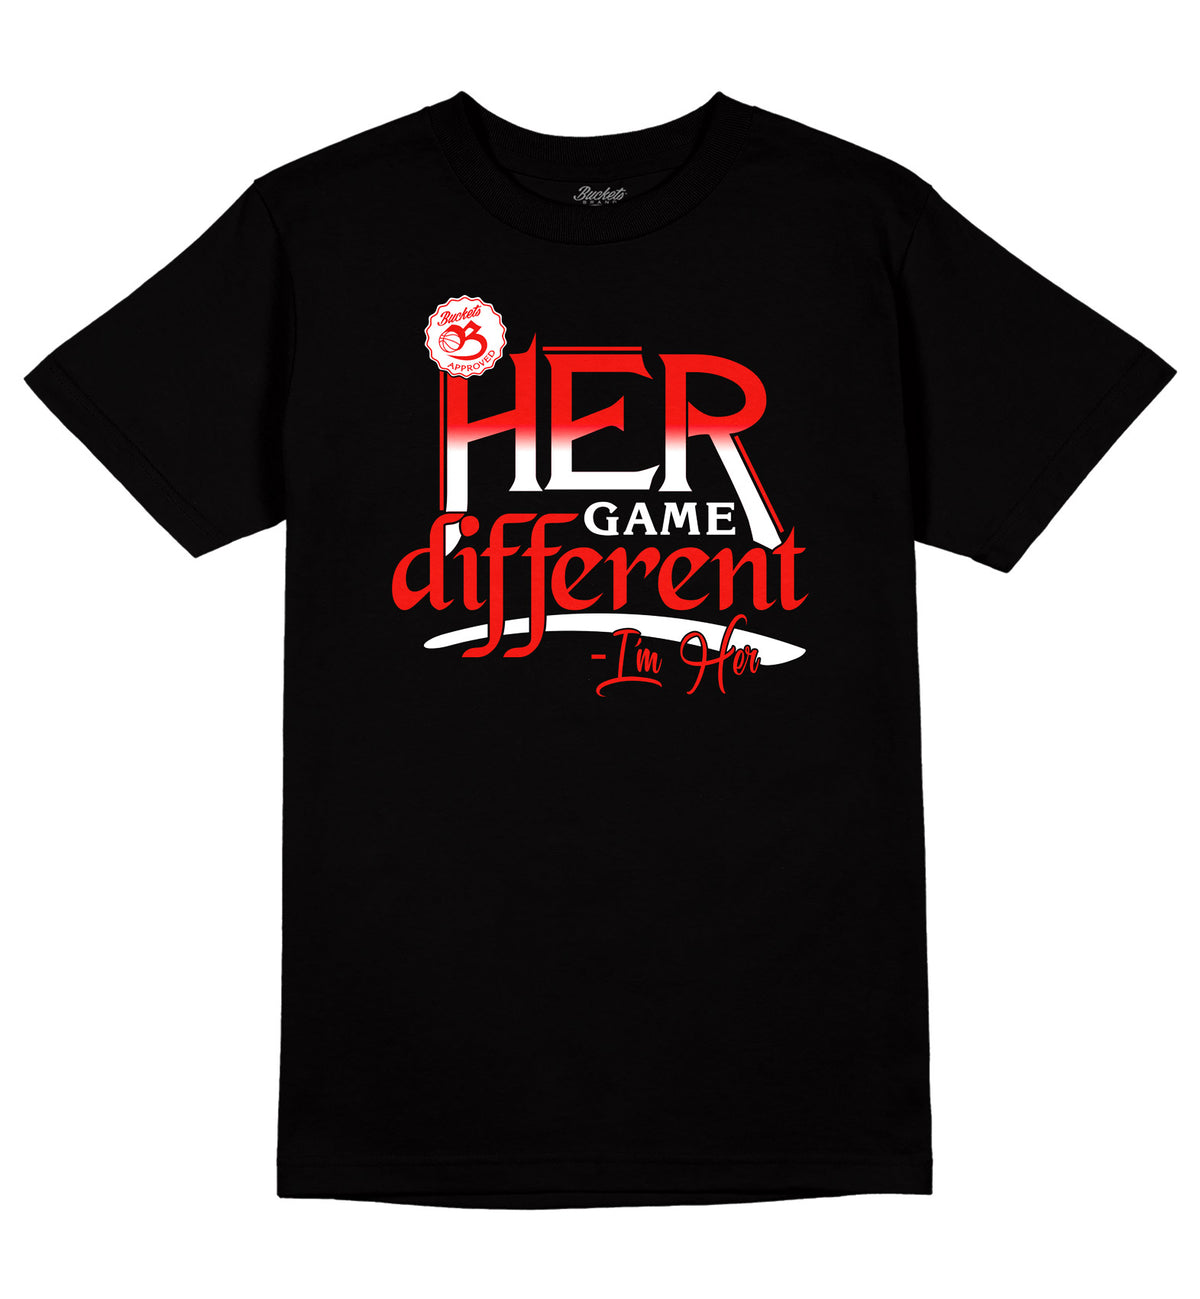 Her Game Different Tee - Black